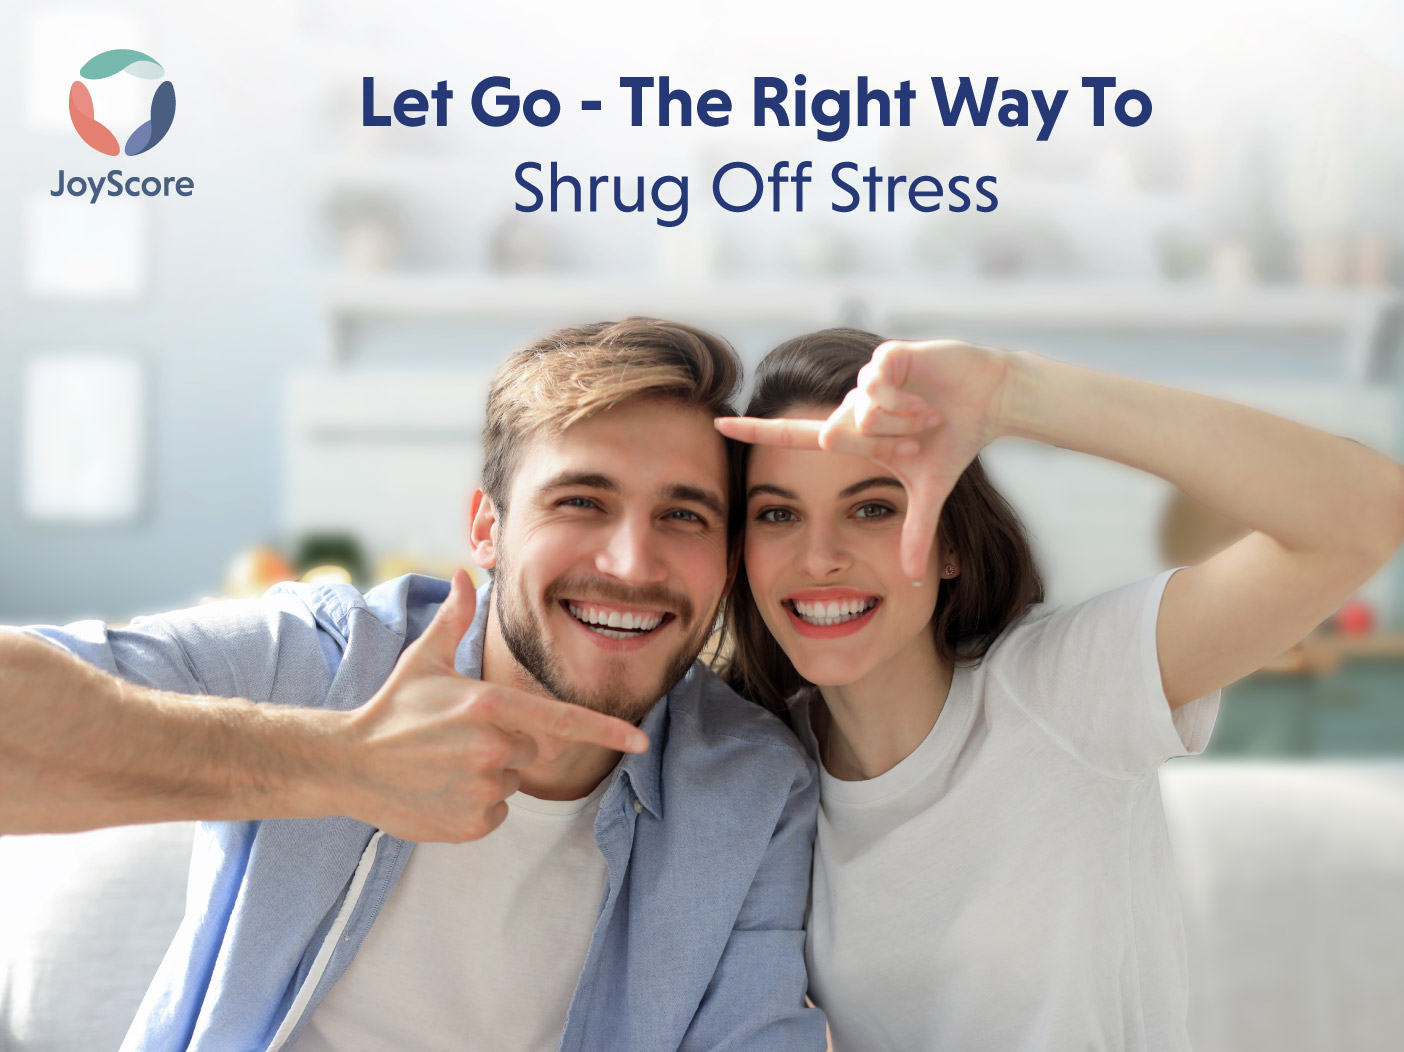 Let go”- The Right Way to Shrug off that Stress